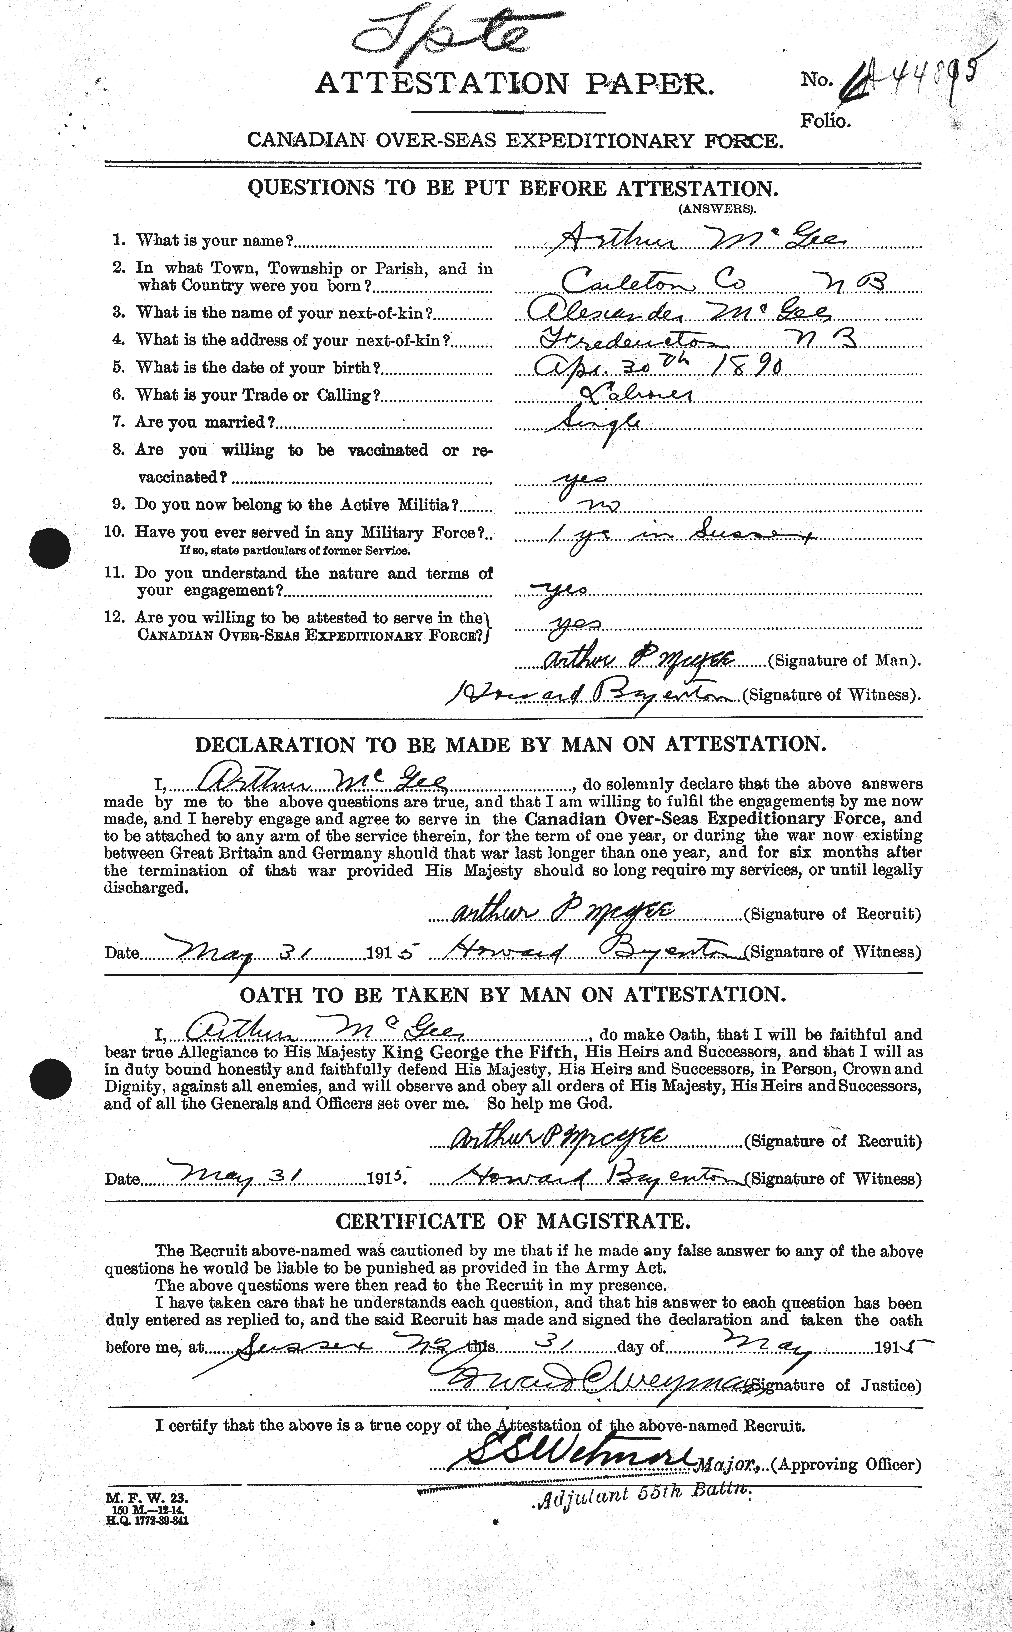 Personnel Records of the First World War - CEF 520424a